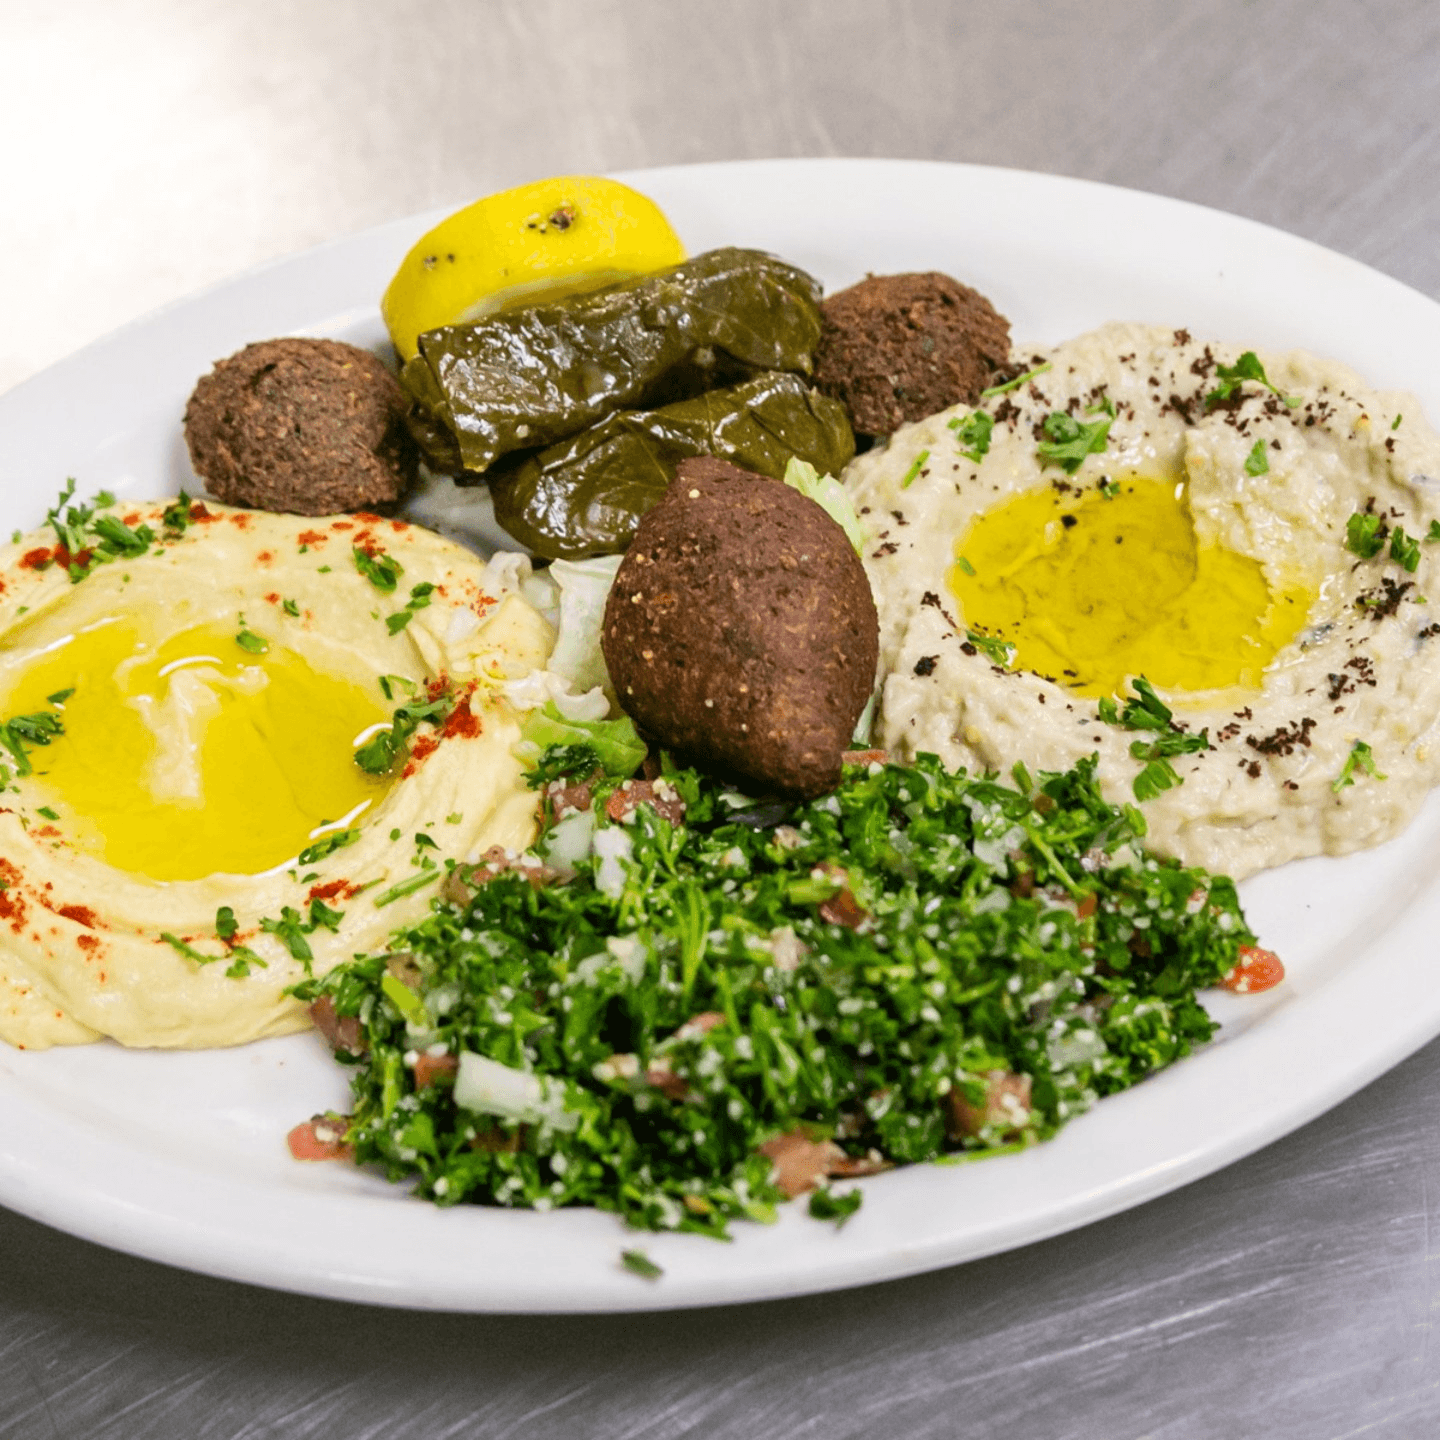 All Your Middle Eastern Favorites - And More!